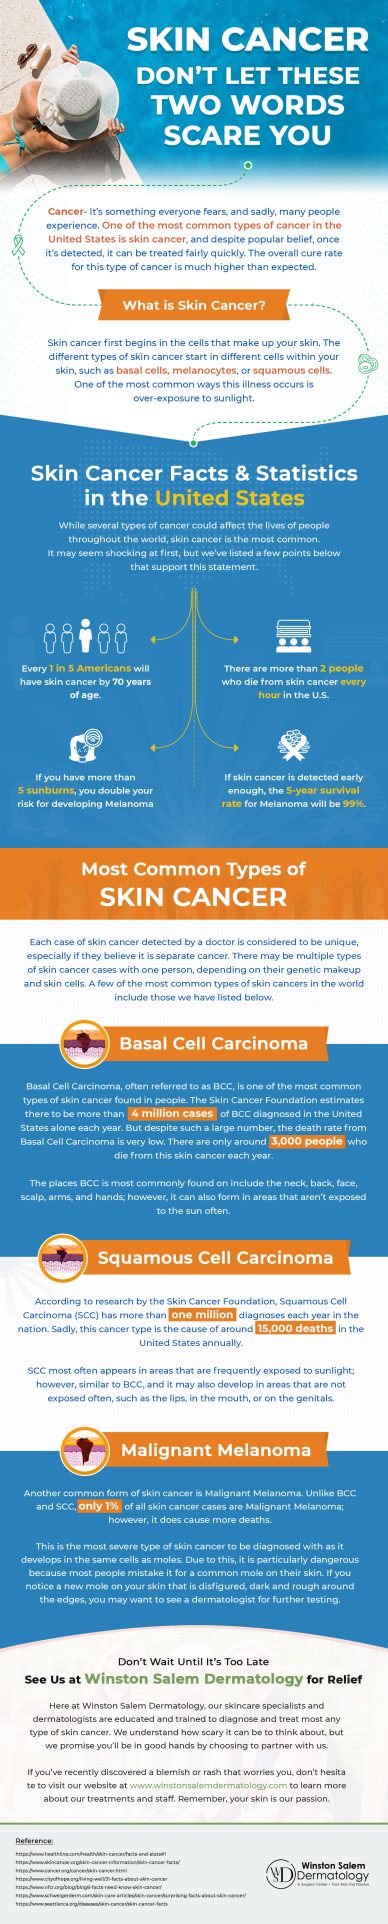 Skin Cancer – Don’t Let These Two Words Scare You